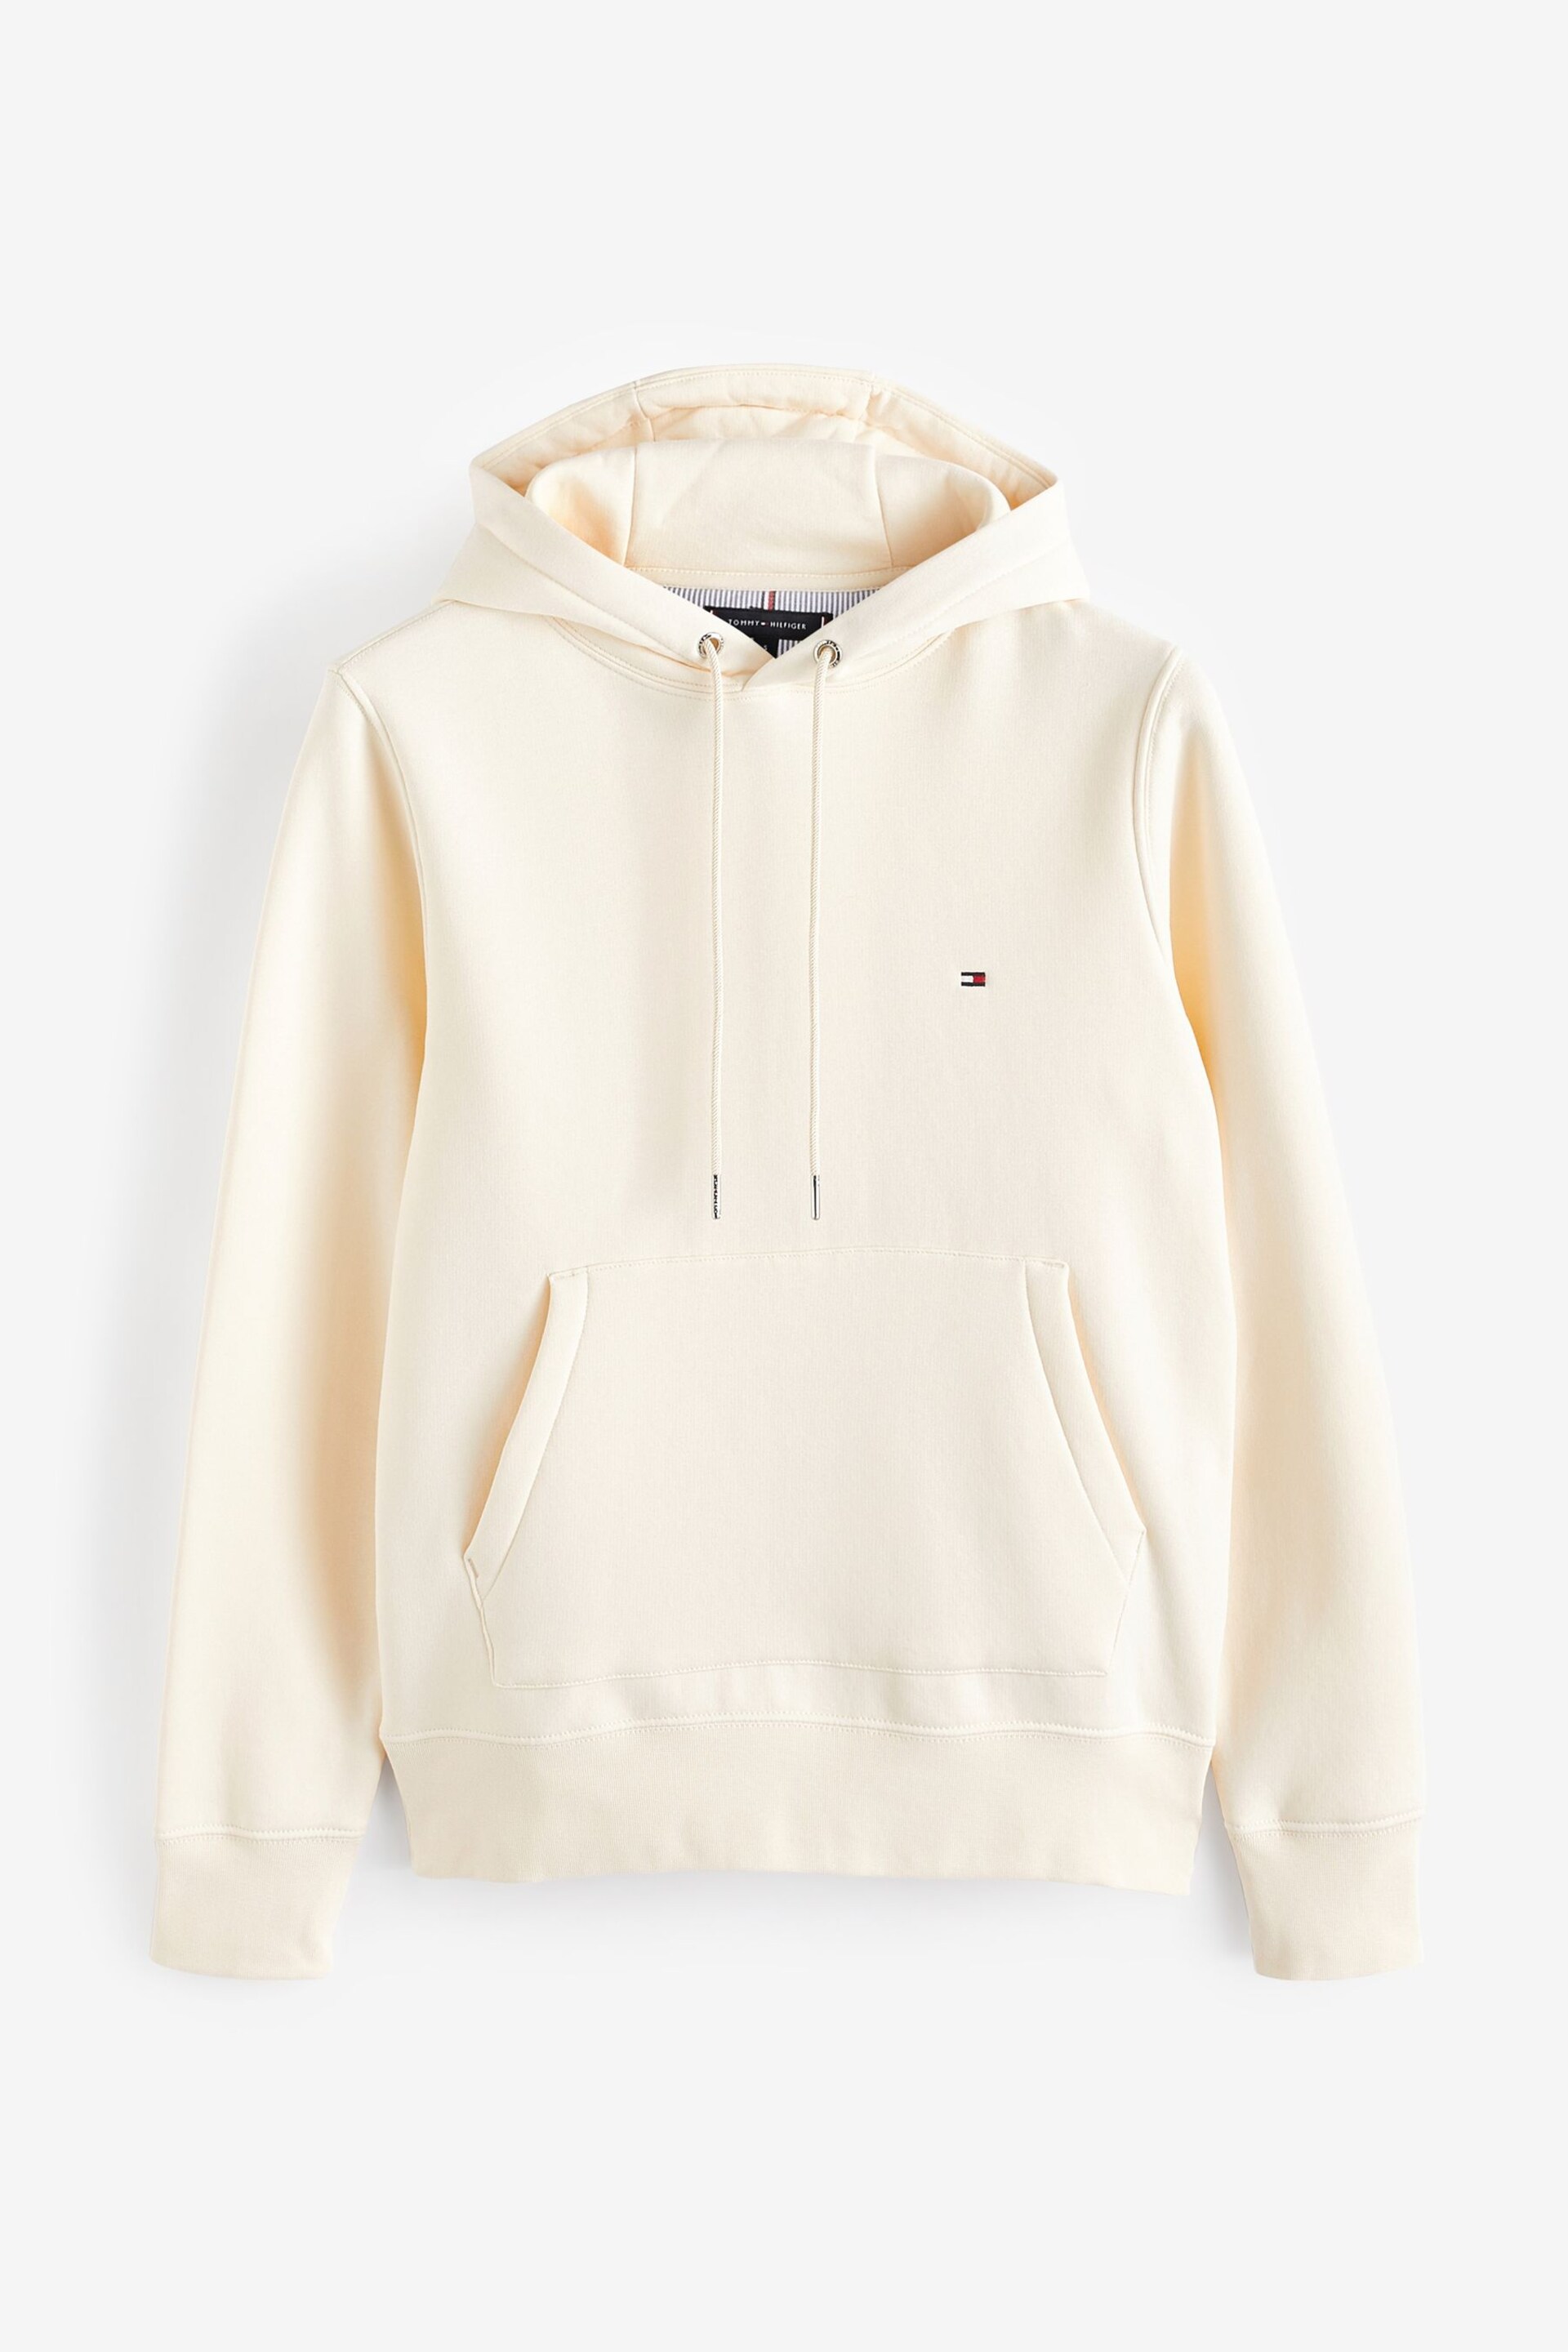 Tommy Hilfiger Natural Classic Flag Hoodie - Image 5 of 5